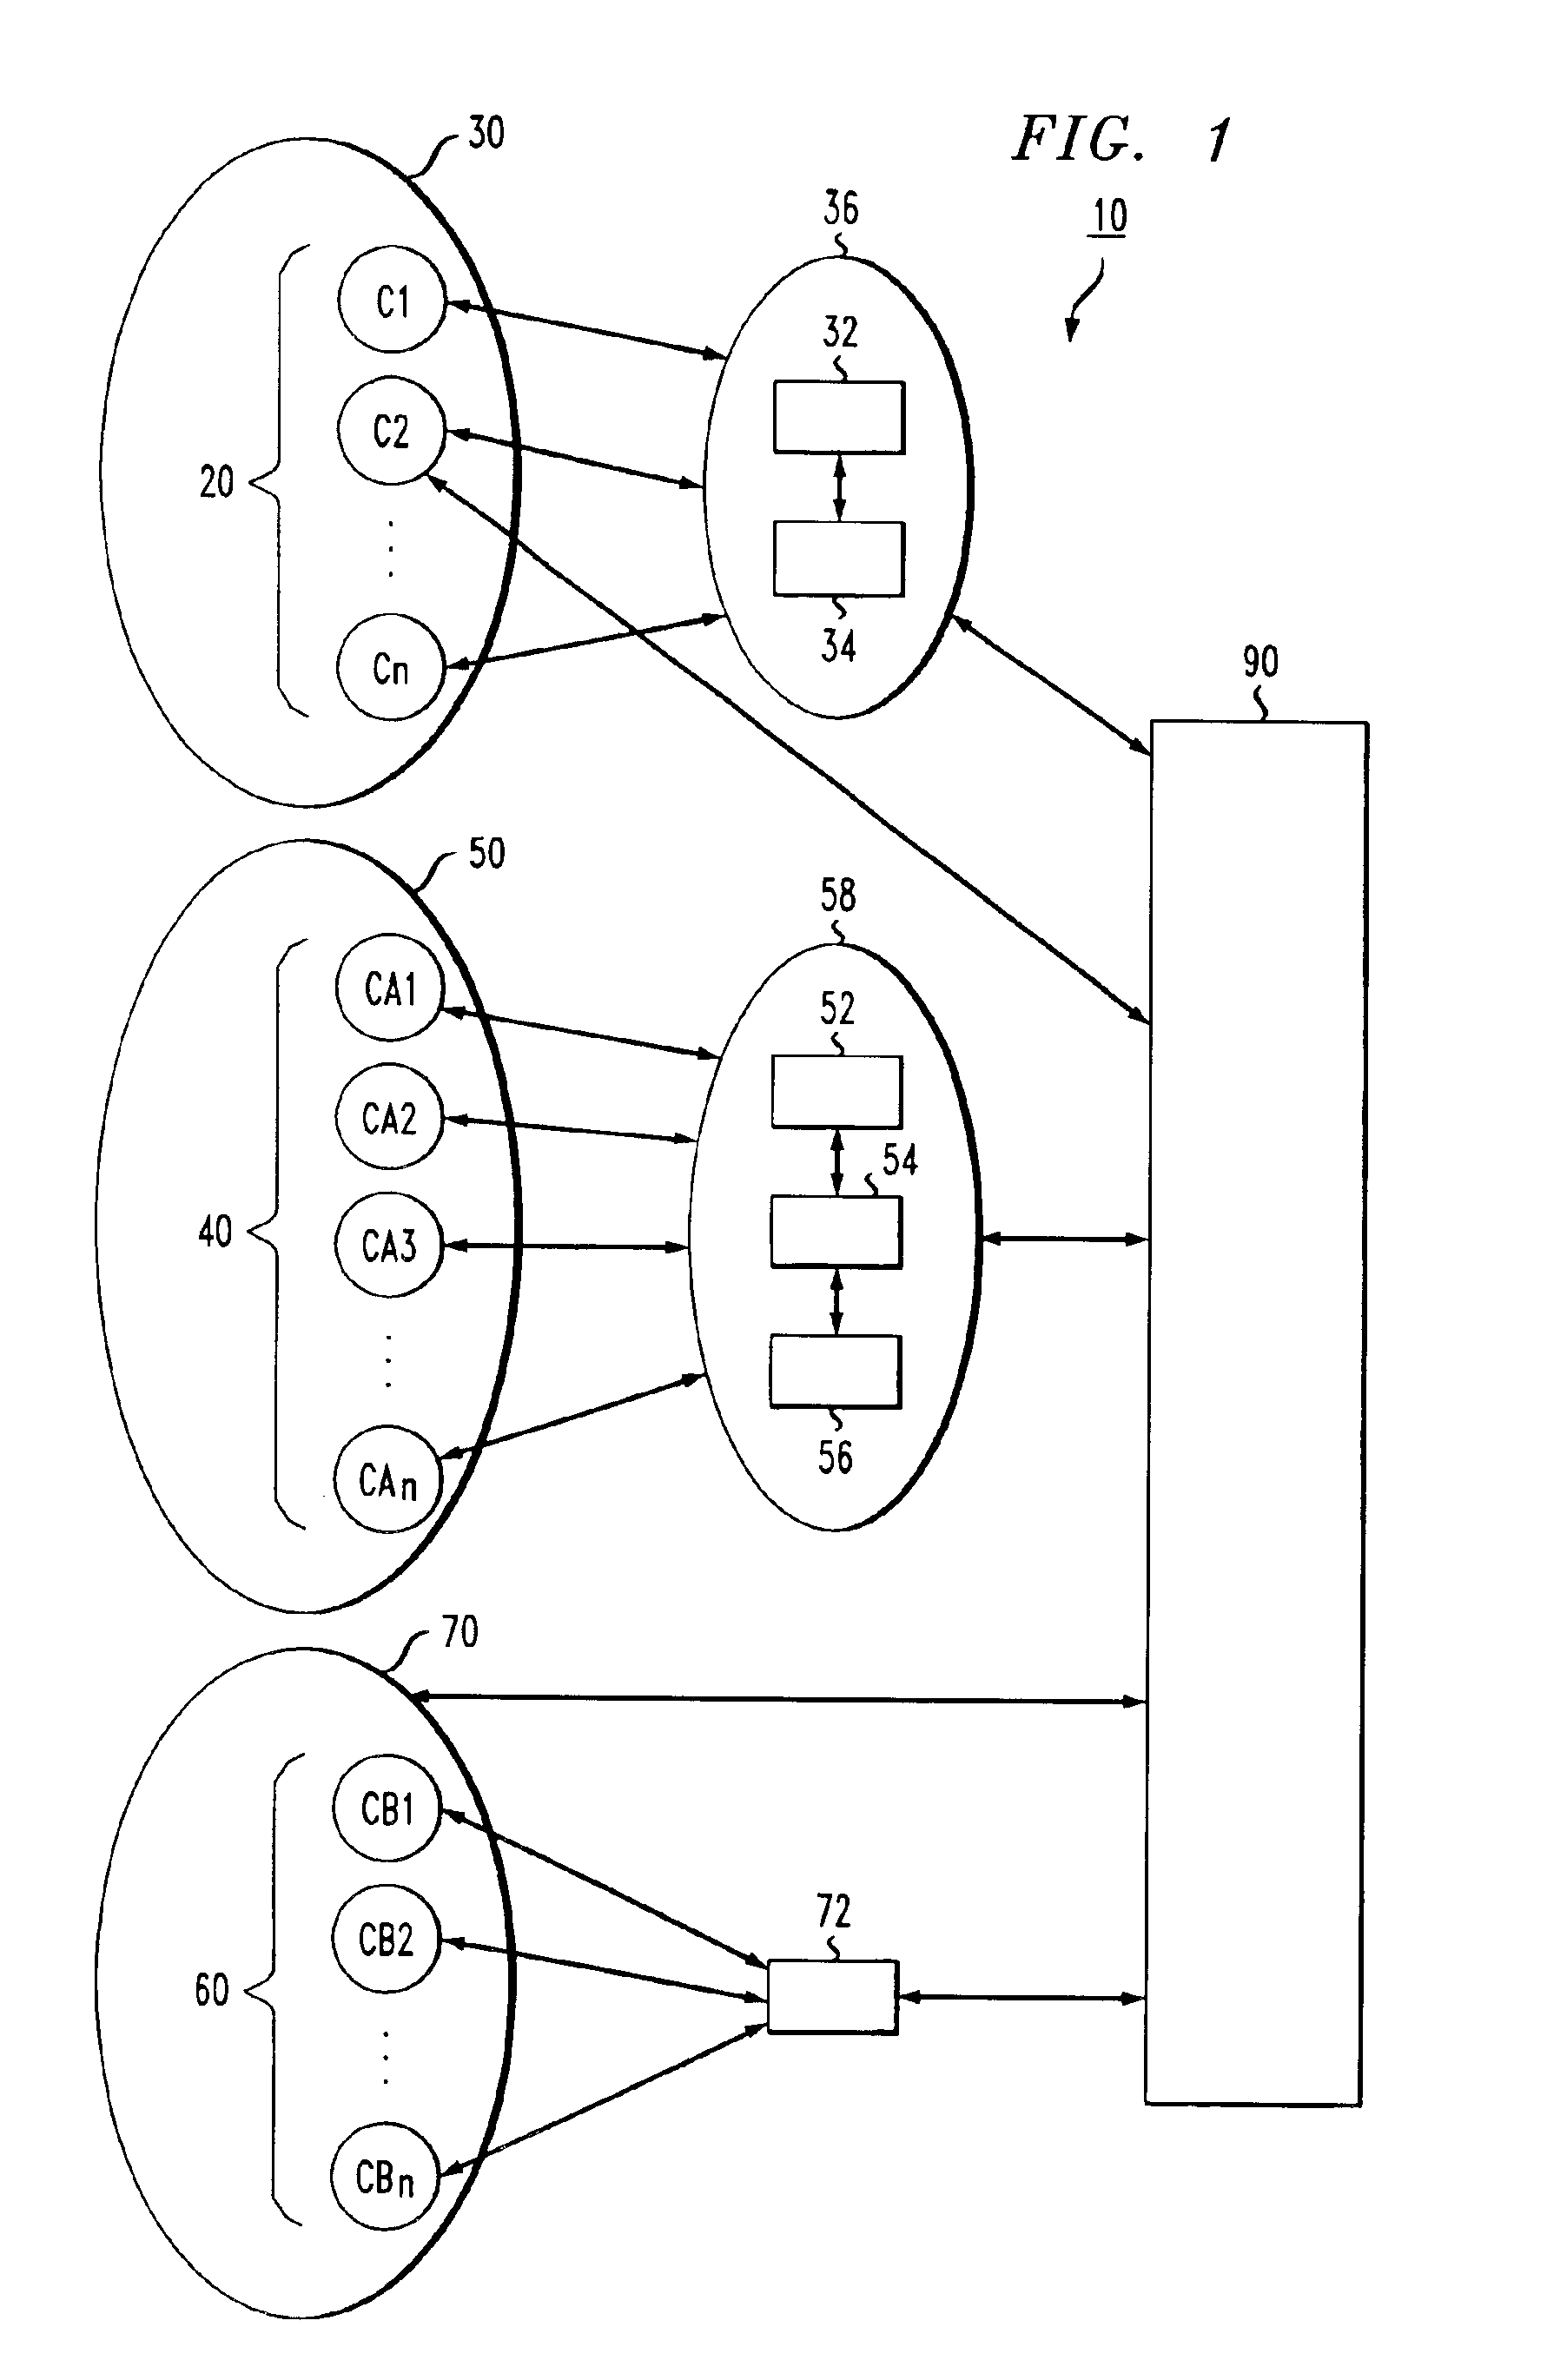 Method for network-aware clustering of clients in a network